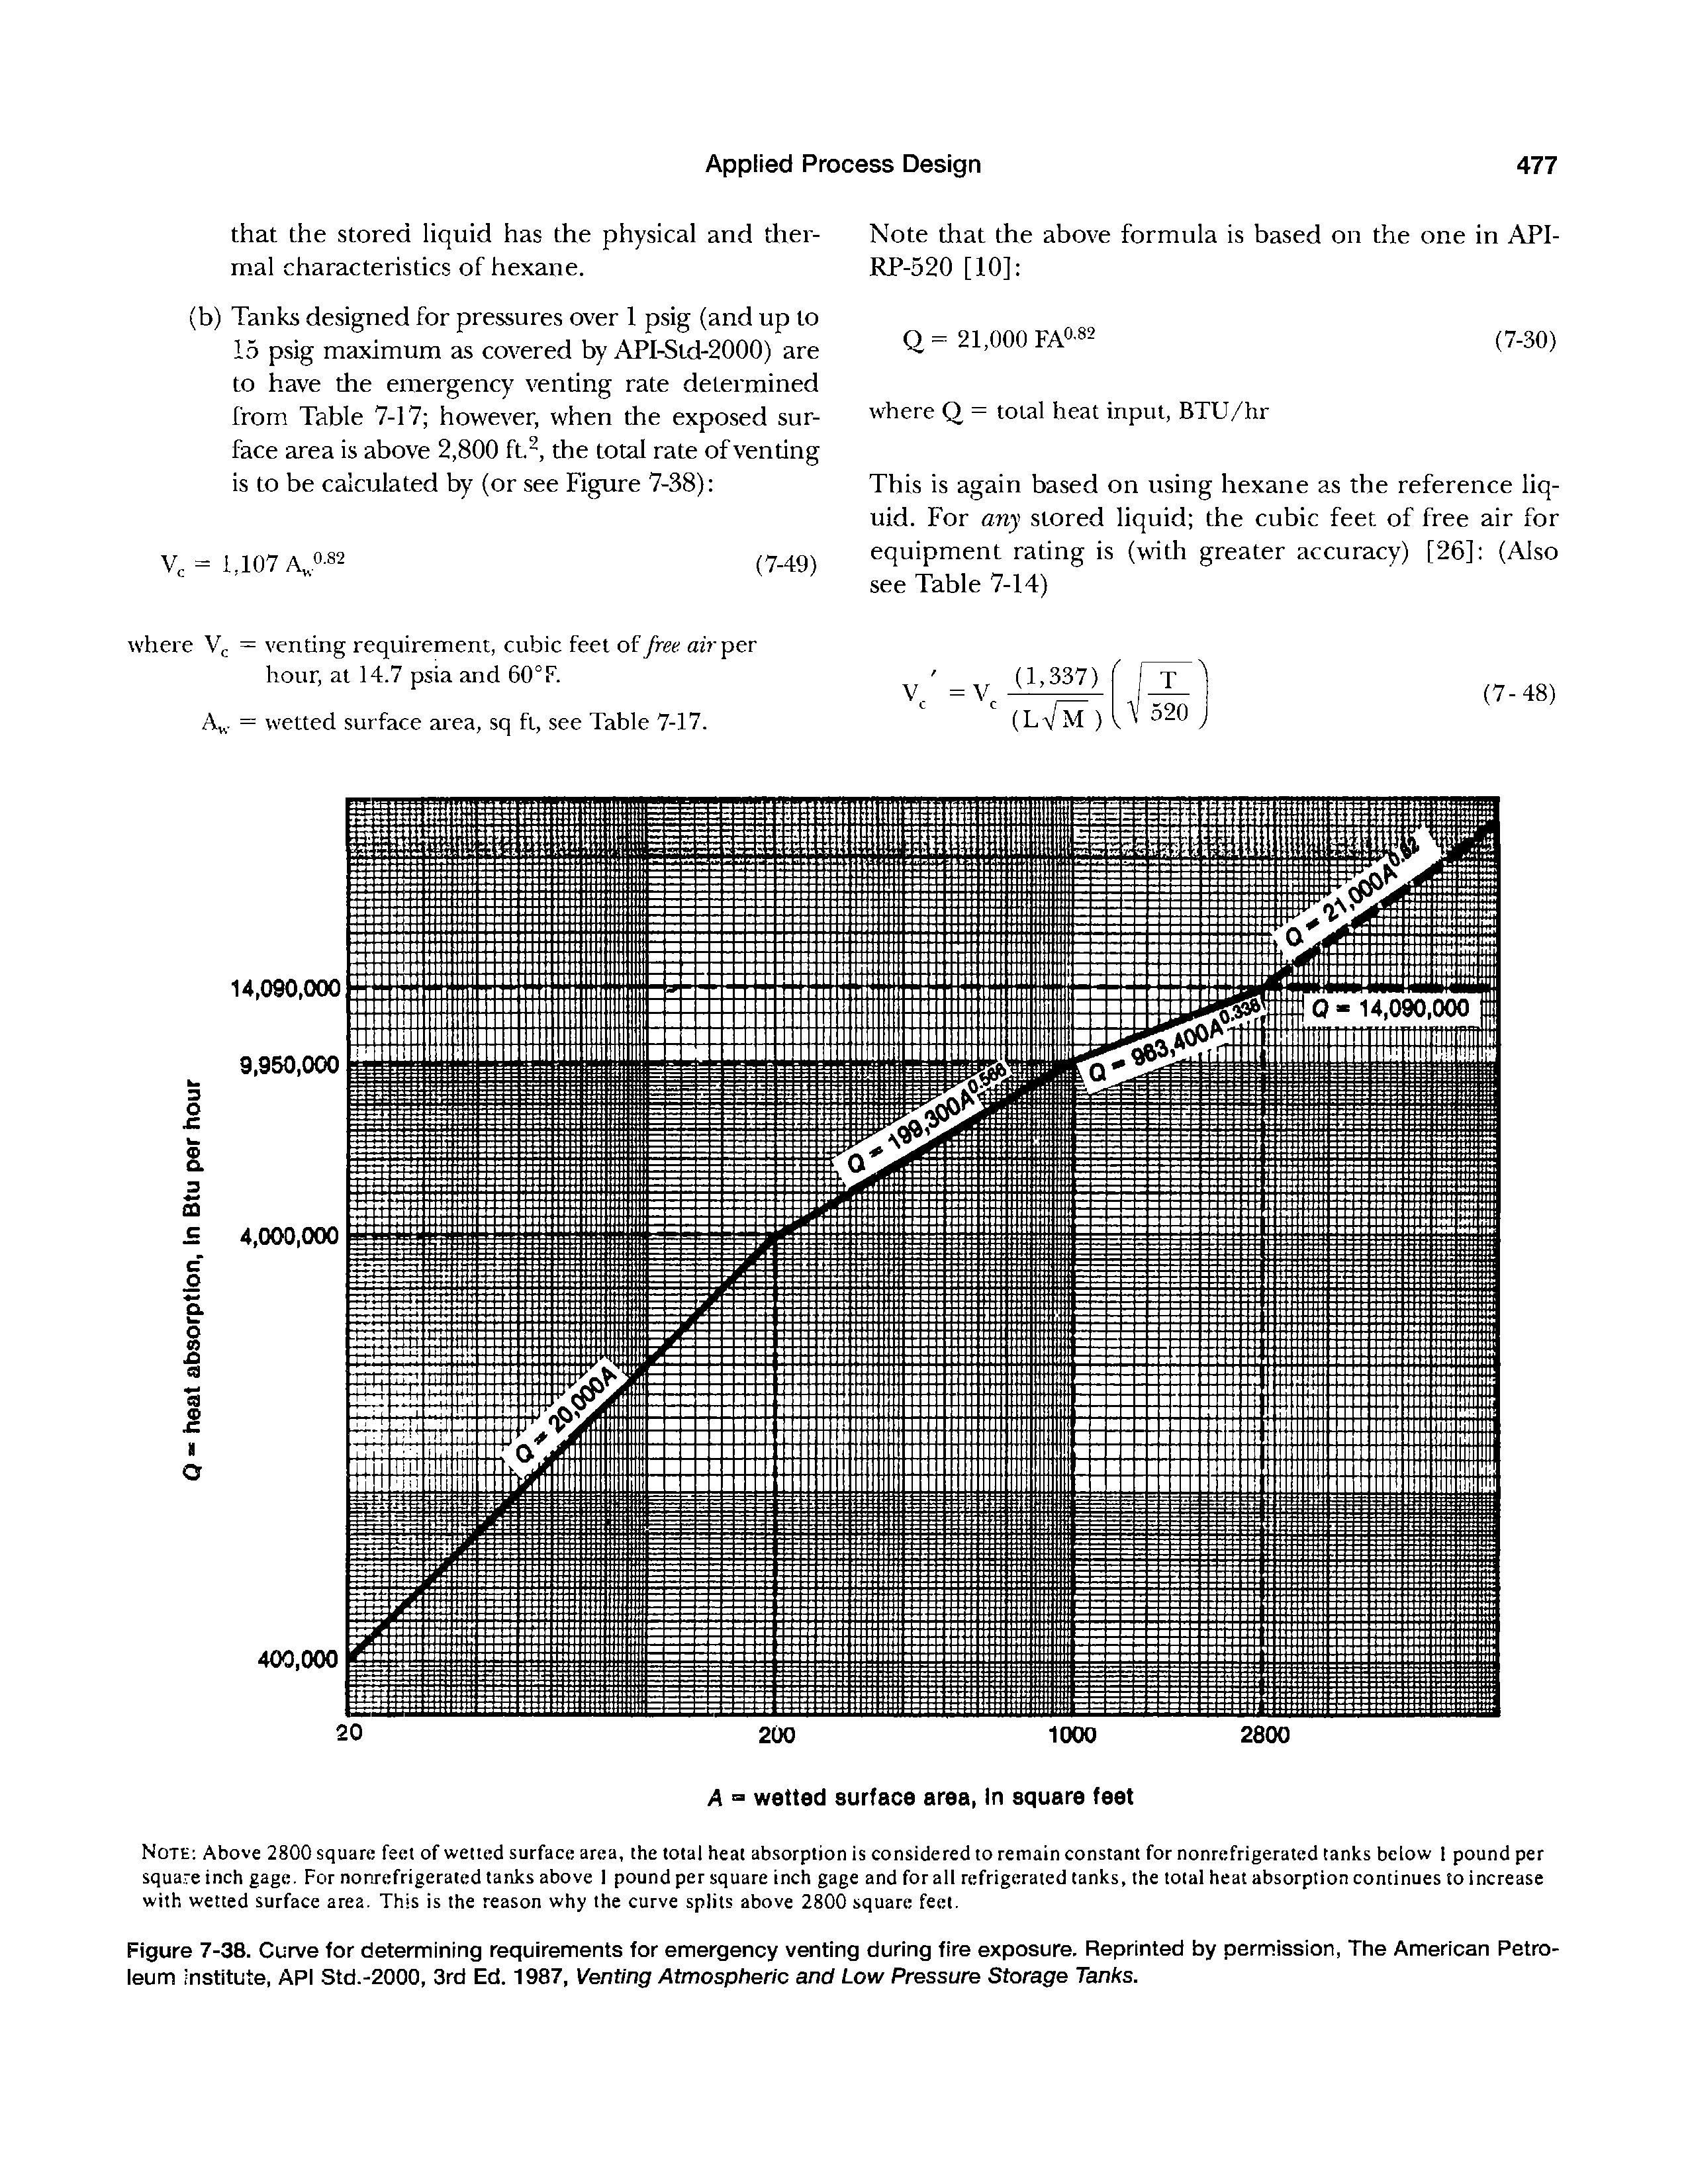 Figure 7-38. Curve for determining requirements for emergency venting during fire exposure. Reprinted by permission, The American Petroleum institute, API Std.-2000, 3rd Ed. 1987, Venting Atmospheric and Low Pressure Storage Tanks.